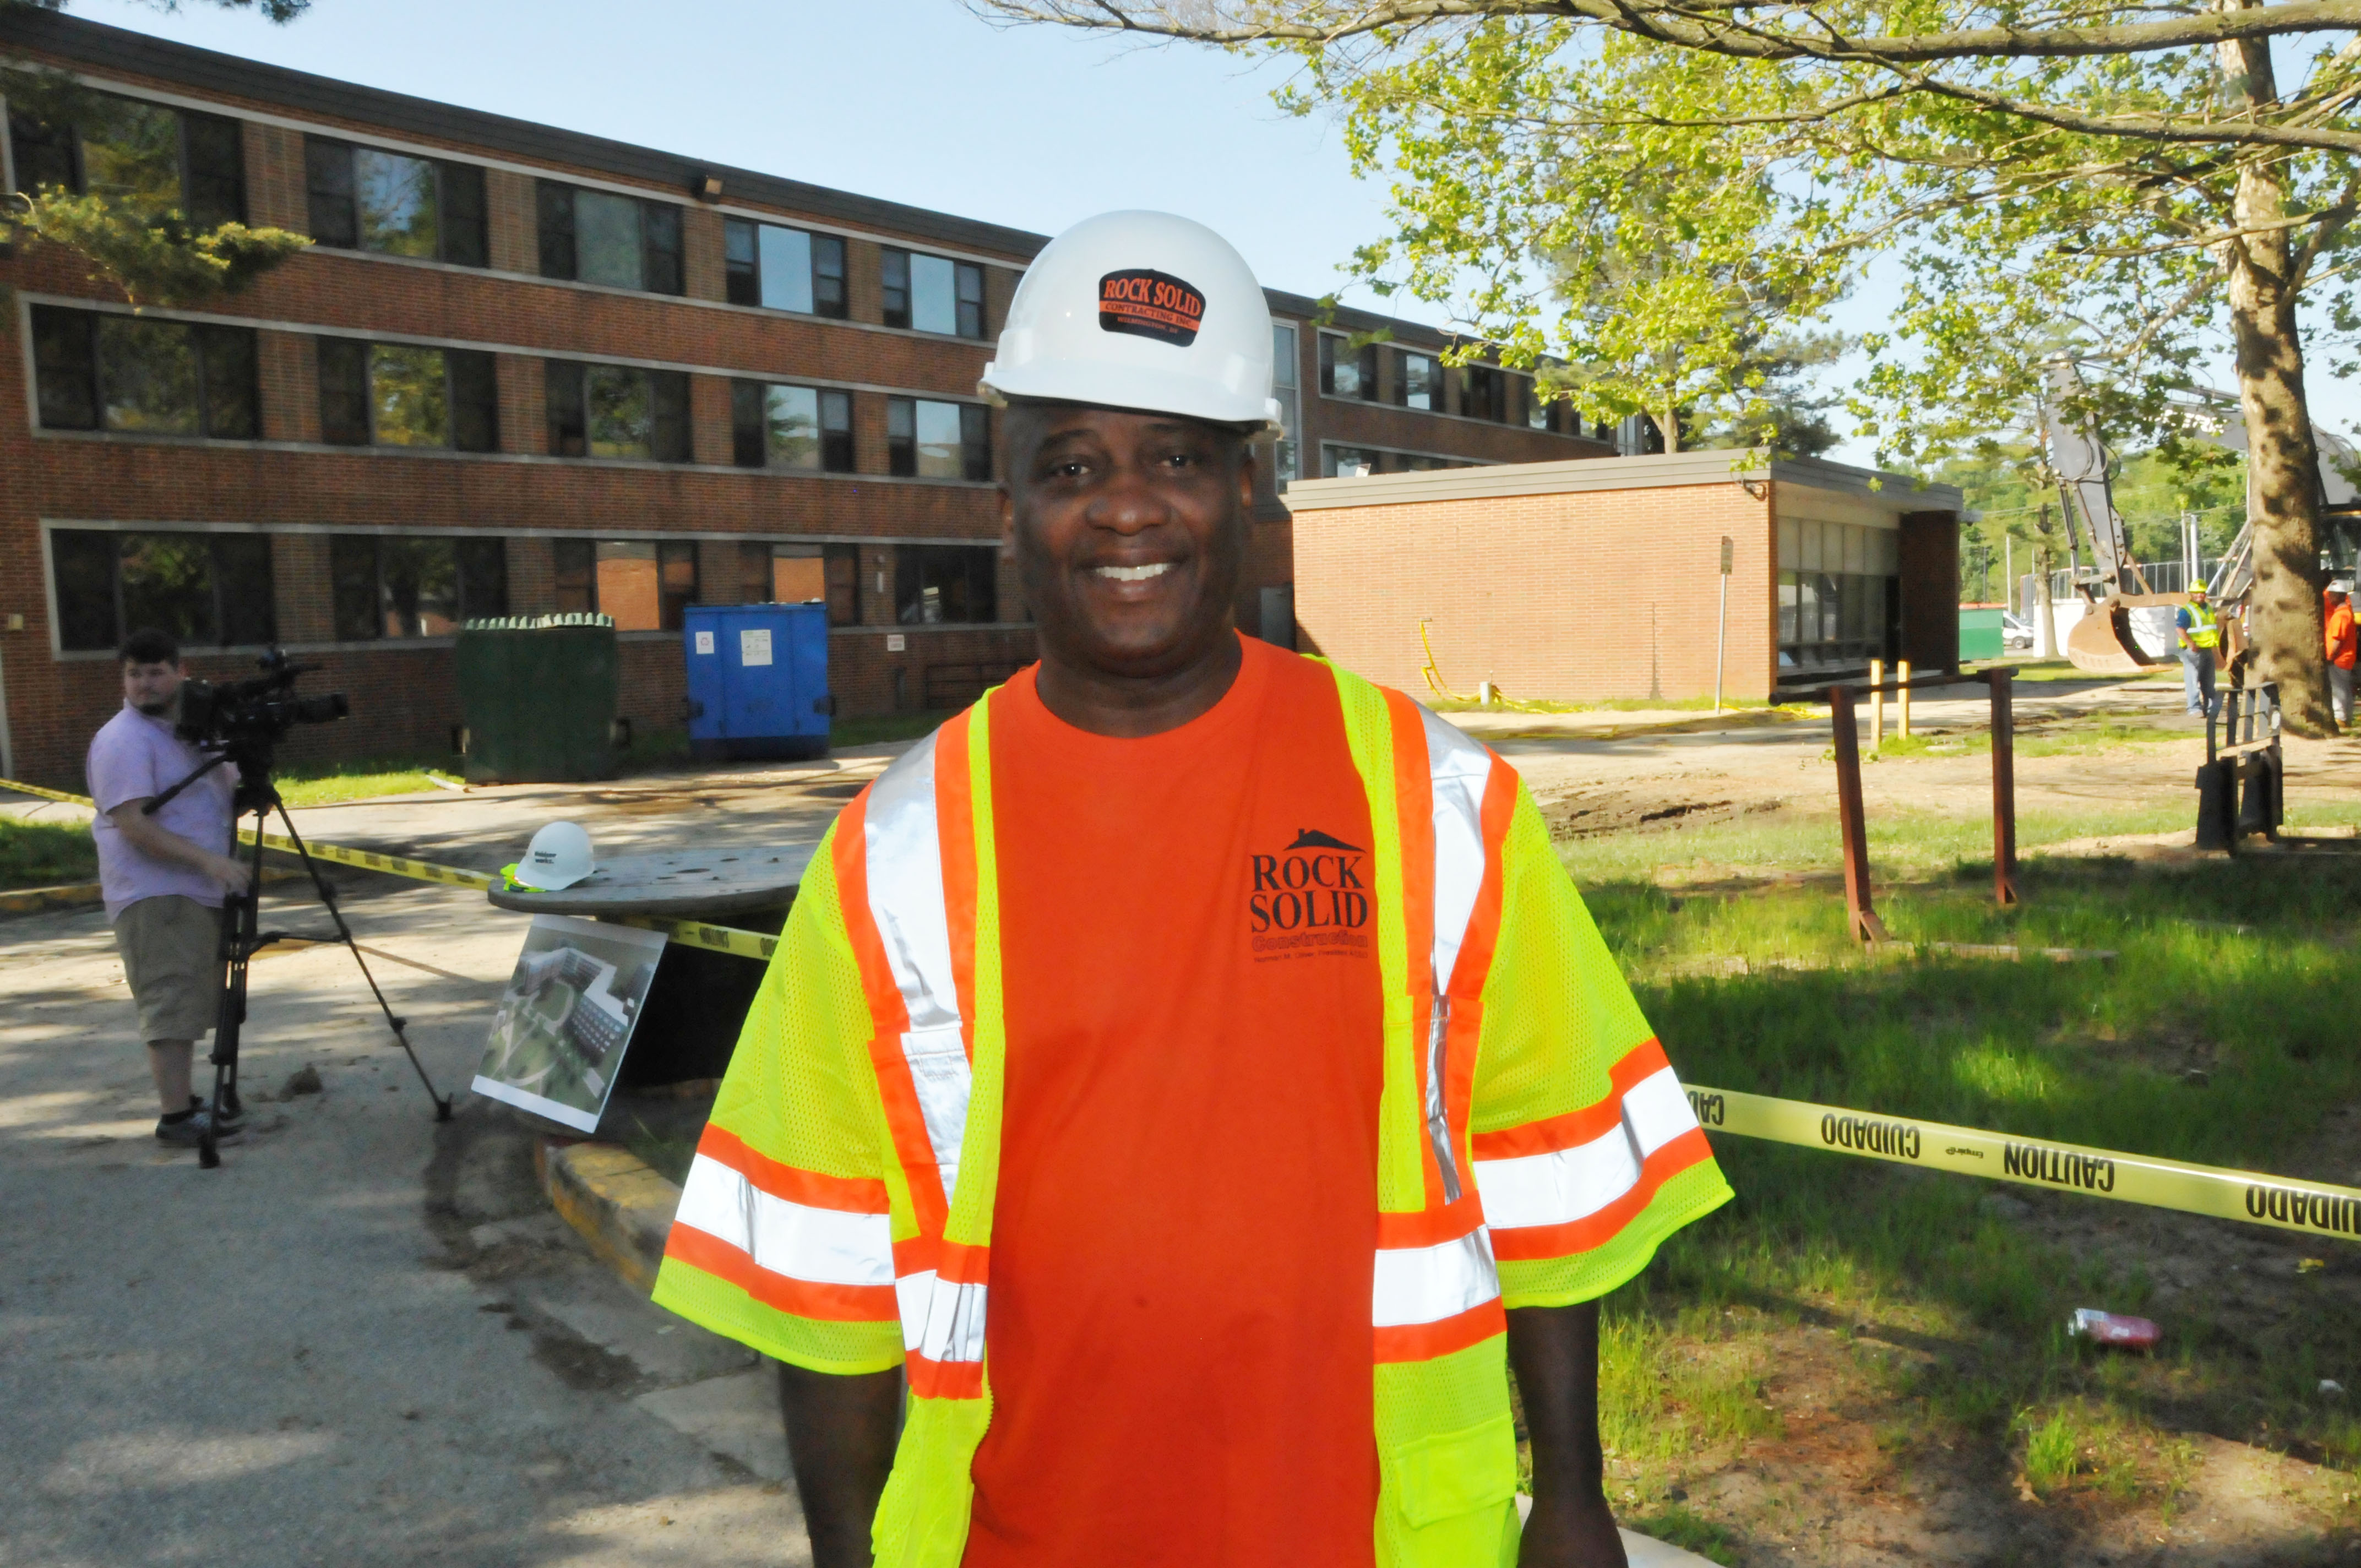 DSU alumnus Norman Oliver's Rock Solid Contracting is enlisted along with Wohlsen Construction to demolish Laws Hall -- the same residential hall where he worked as a residential assistant in the early 1980s.